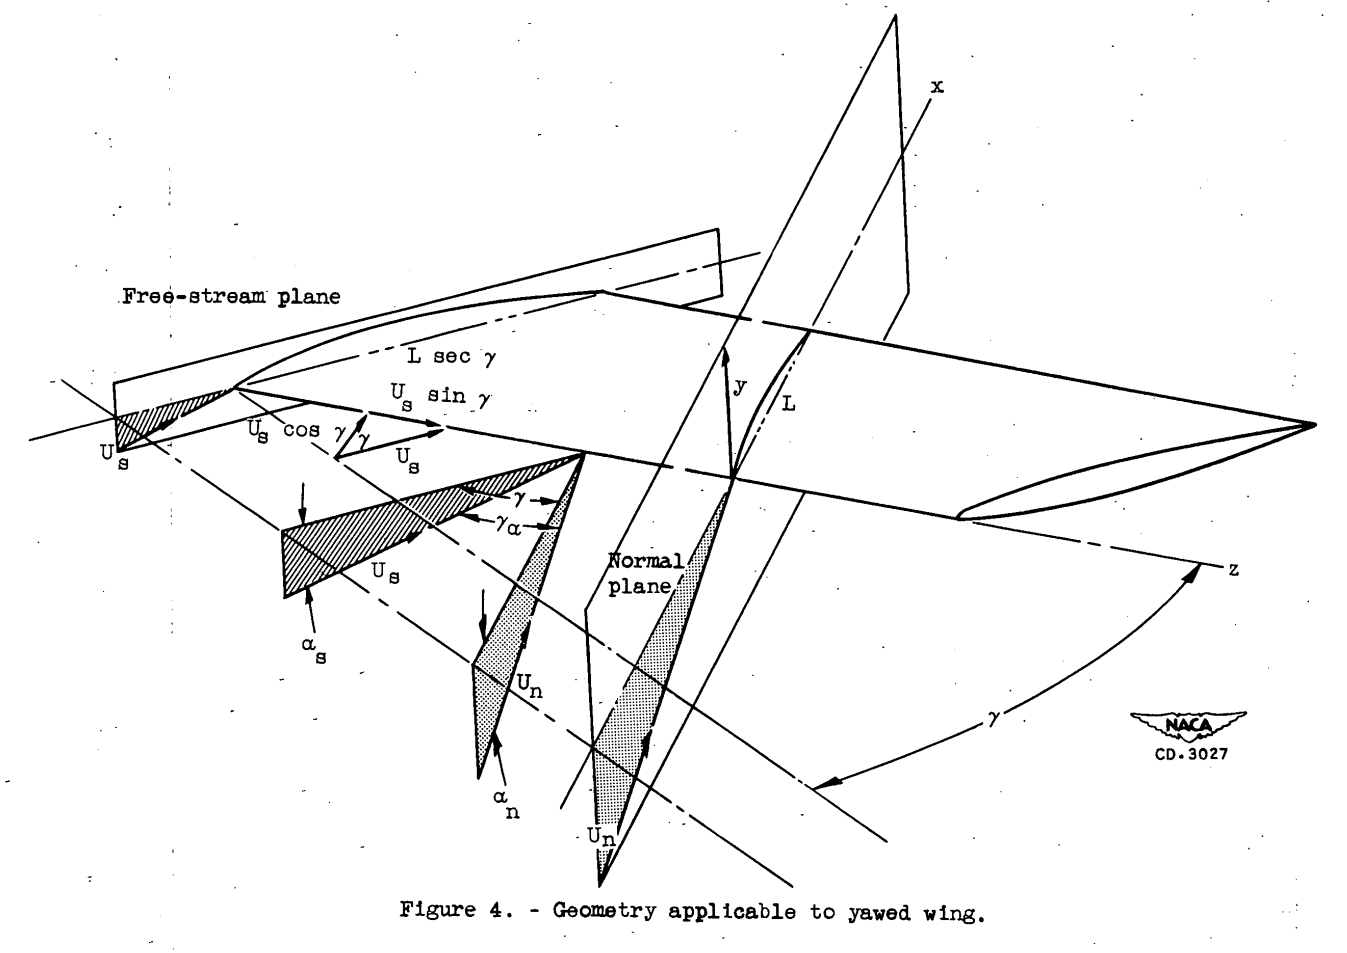 Figure 4. Geometry applicable to yawed wing.